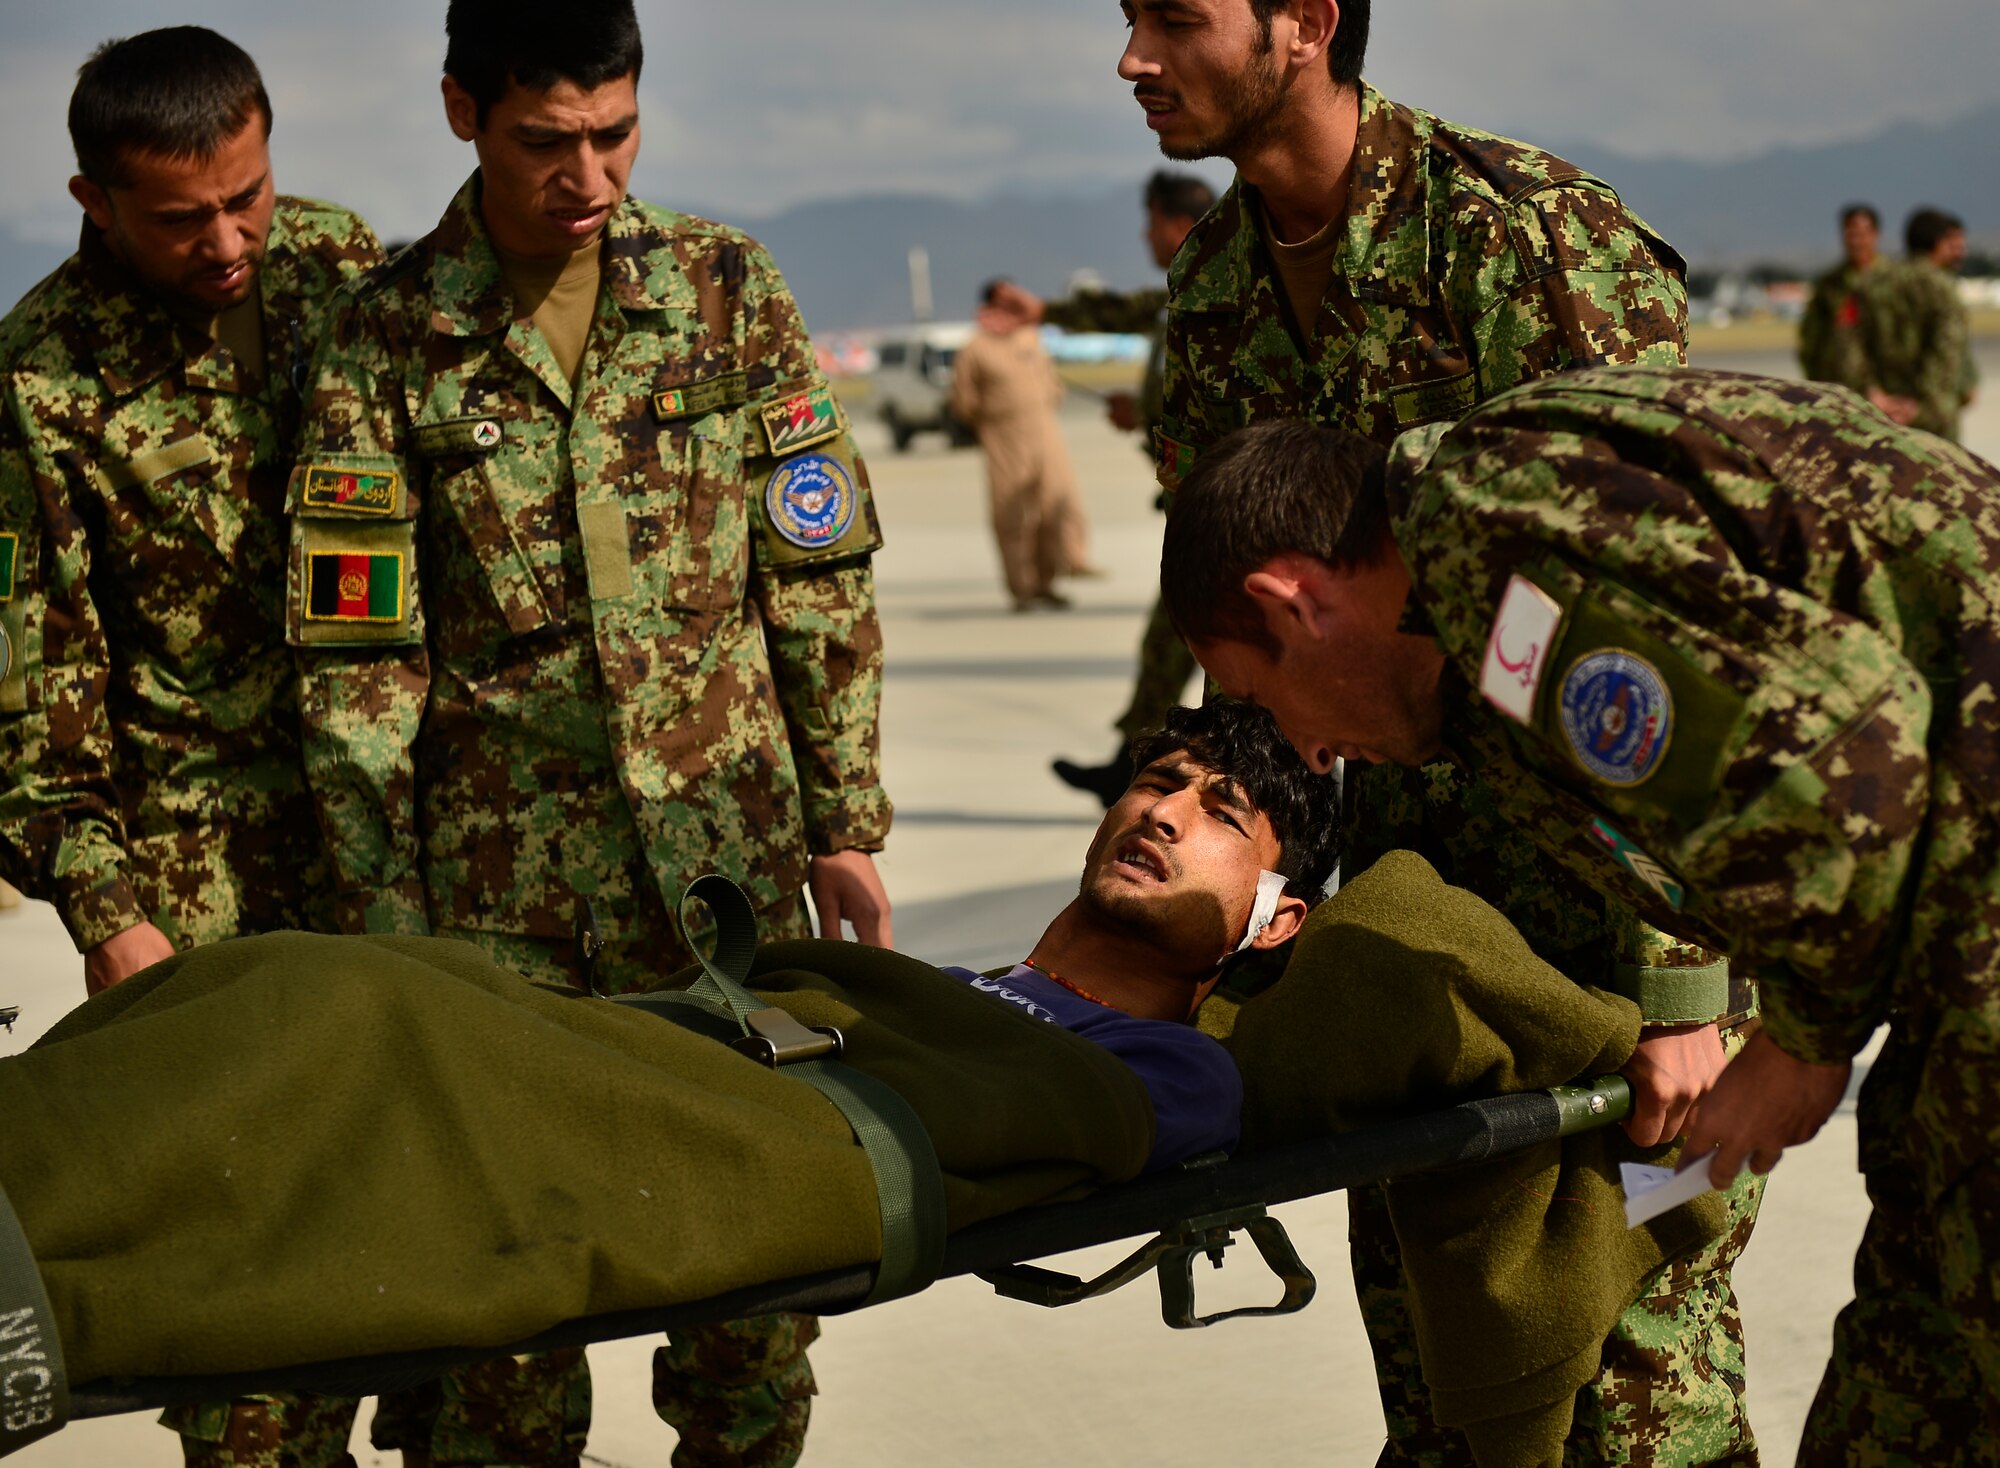 Afghan National Army soldiers transport an injured ANA soldier at the conclusion of a casualty evacuation, Kabul, Afghanistan, May 19, 2014. The Afghan aircrew successfully loaded the human remains, ANA soldiers and other personnel seamlessly. The aircrew assisted 16 injured patients onto stretchers and into safe positions during the flight.  (U.S. Air Force photo by Staff Sgt. Vernon Young Jr.)